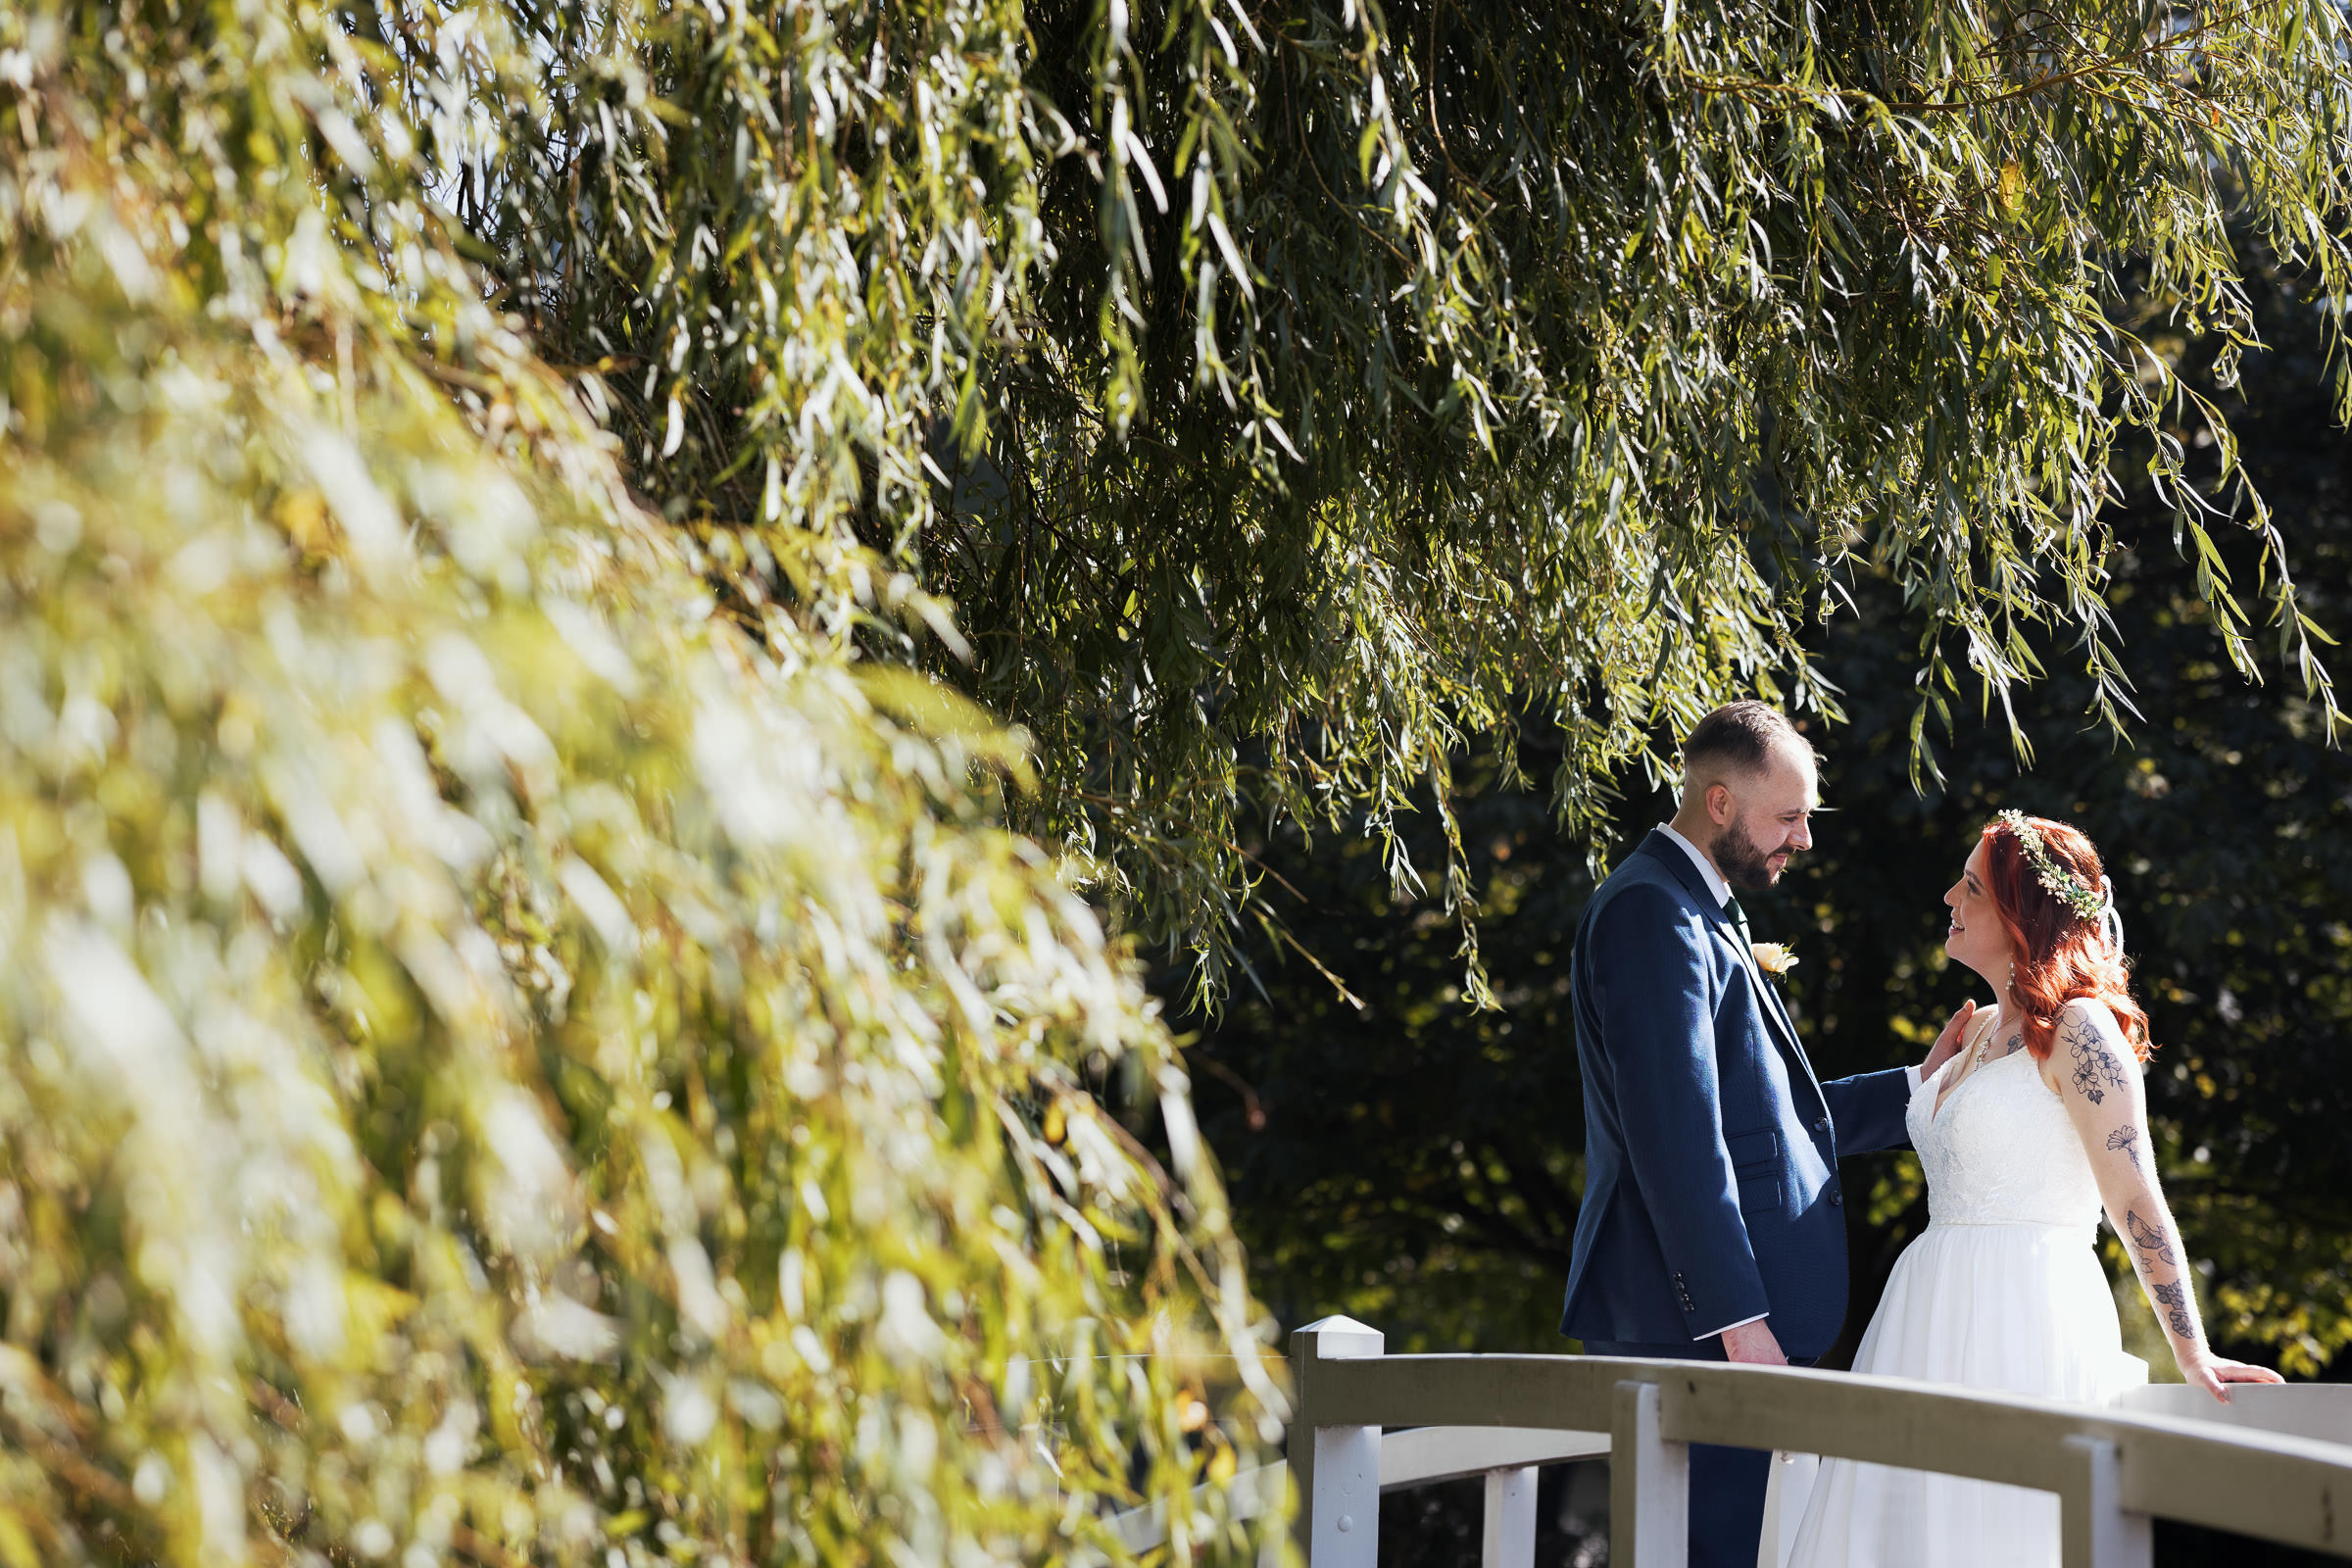 The newly married talking on the bridge under the weeping willow. High House Weddings, Old Heath Rd, Althorne, Chelmsford CM3 6EW